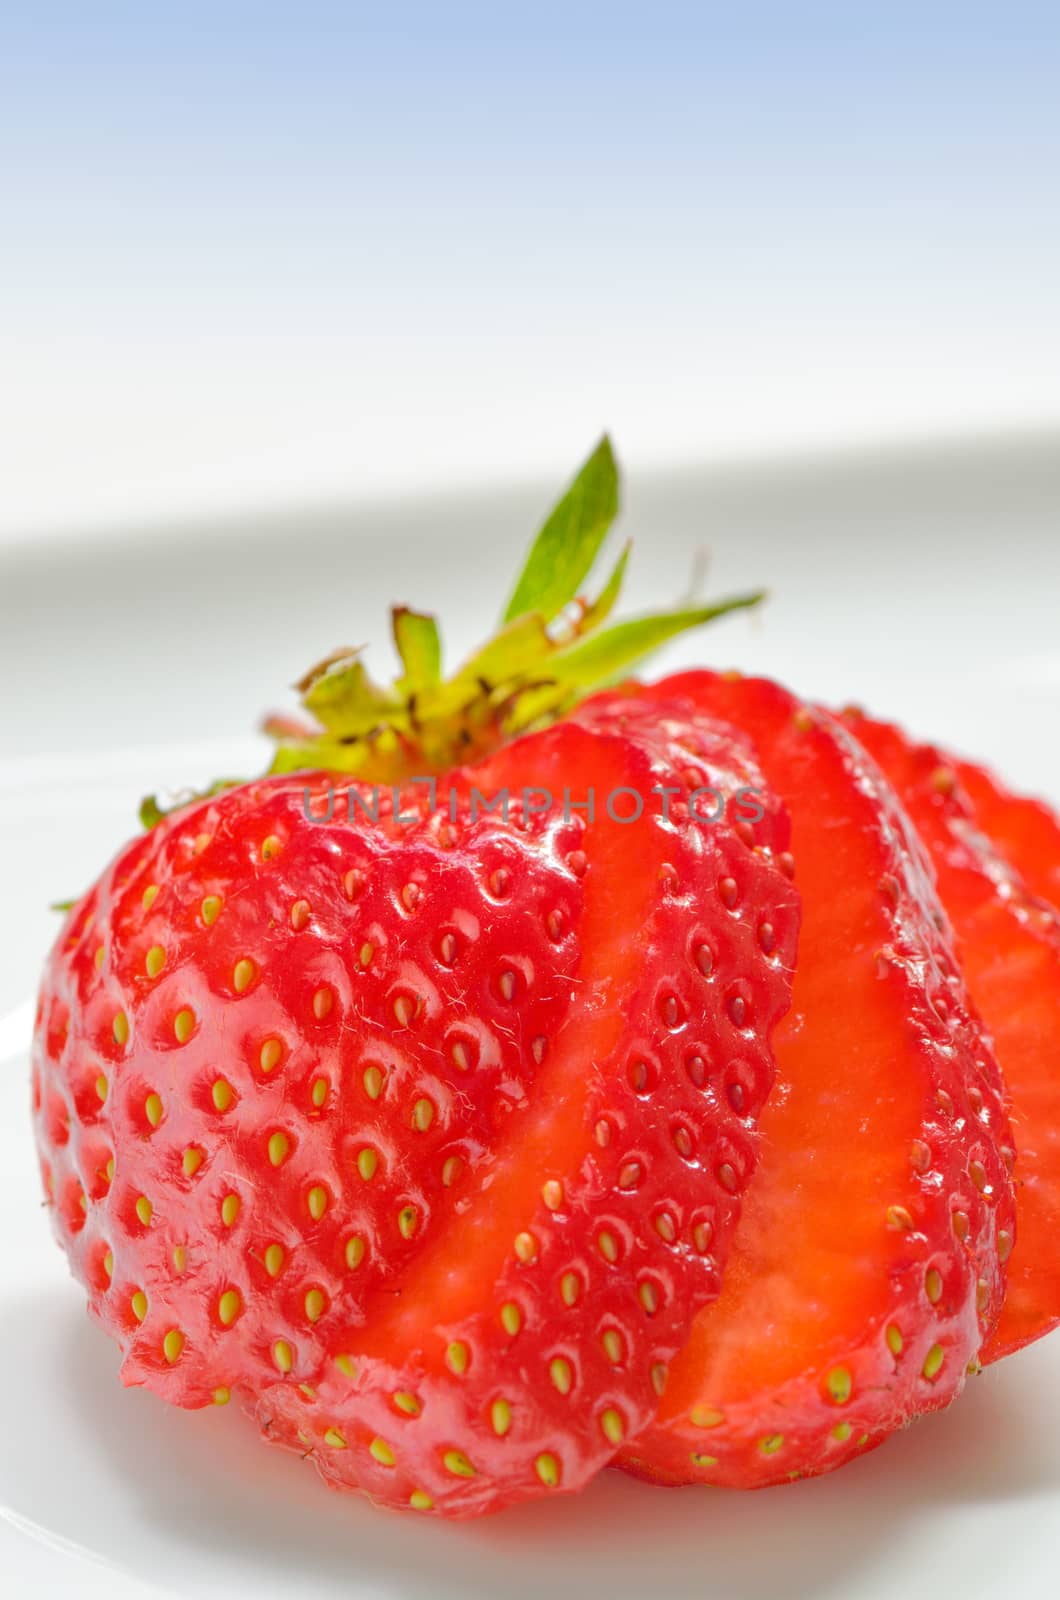 Strawberry slices cut on a white background